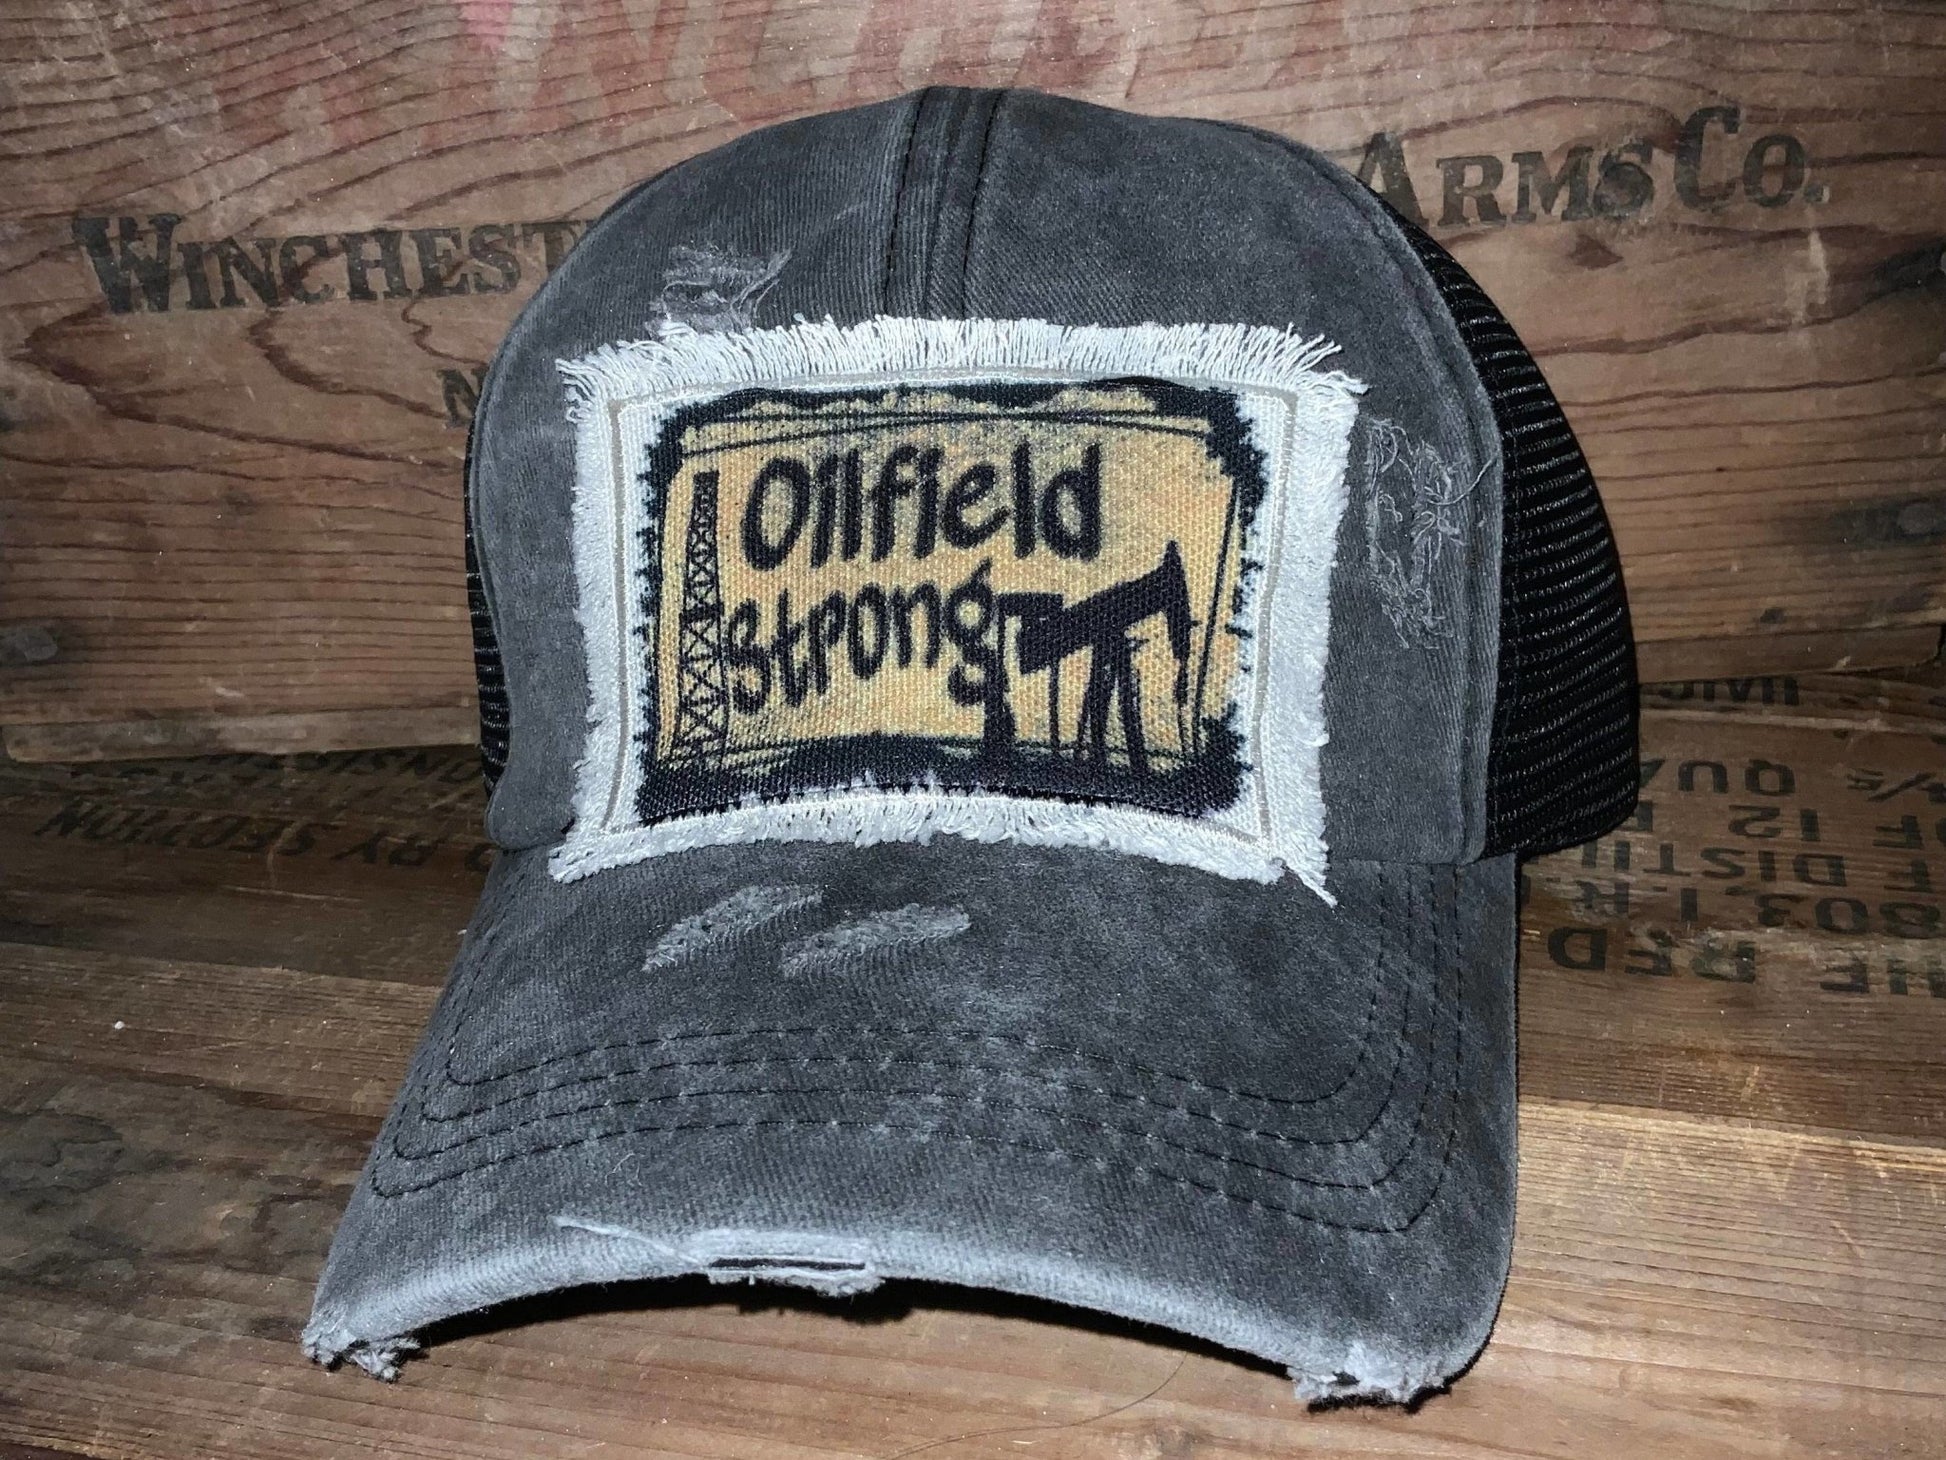 Oilfield Strong - CountryFide Custom Accessories and Outdoors